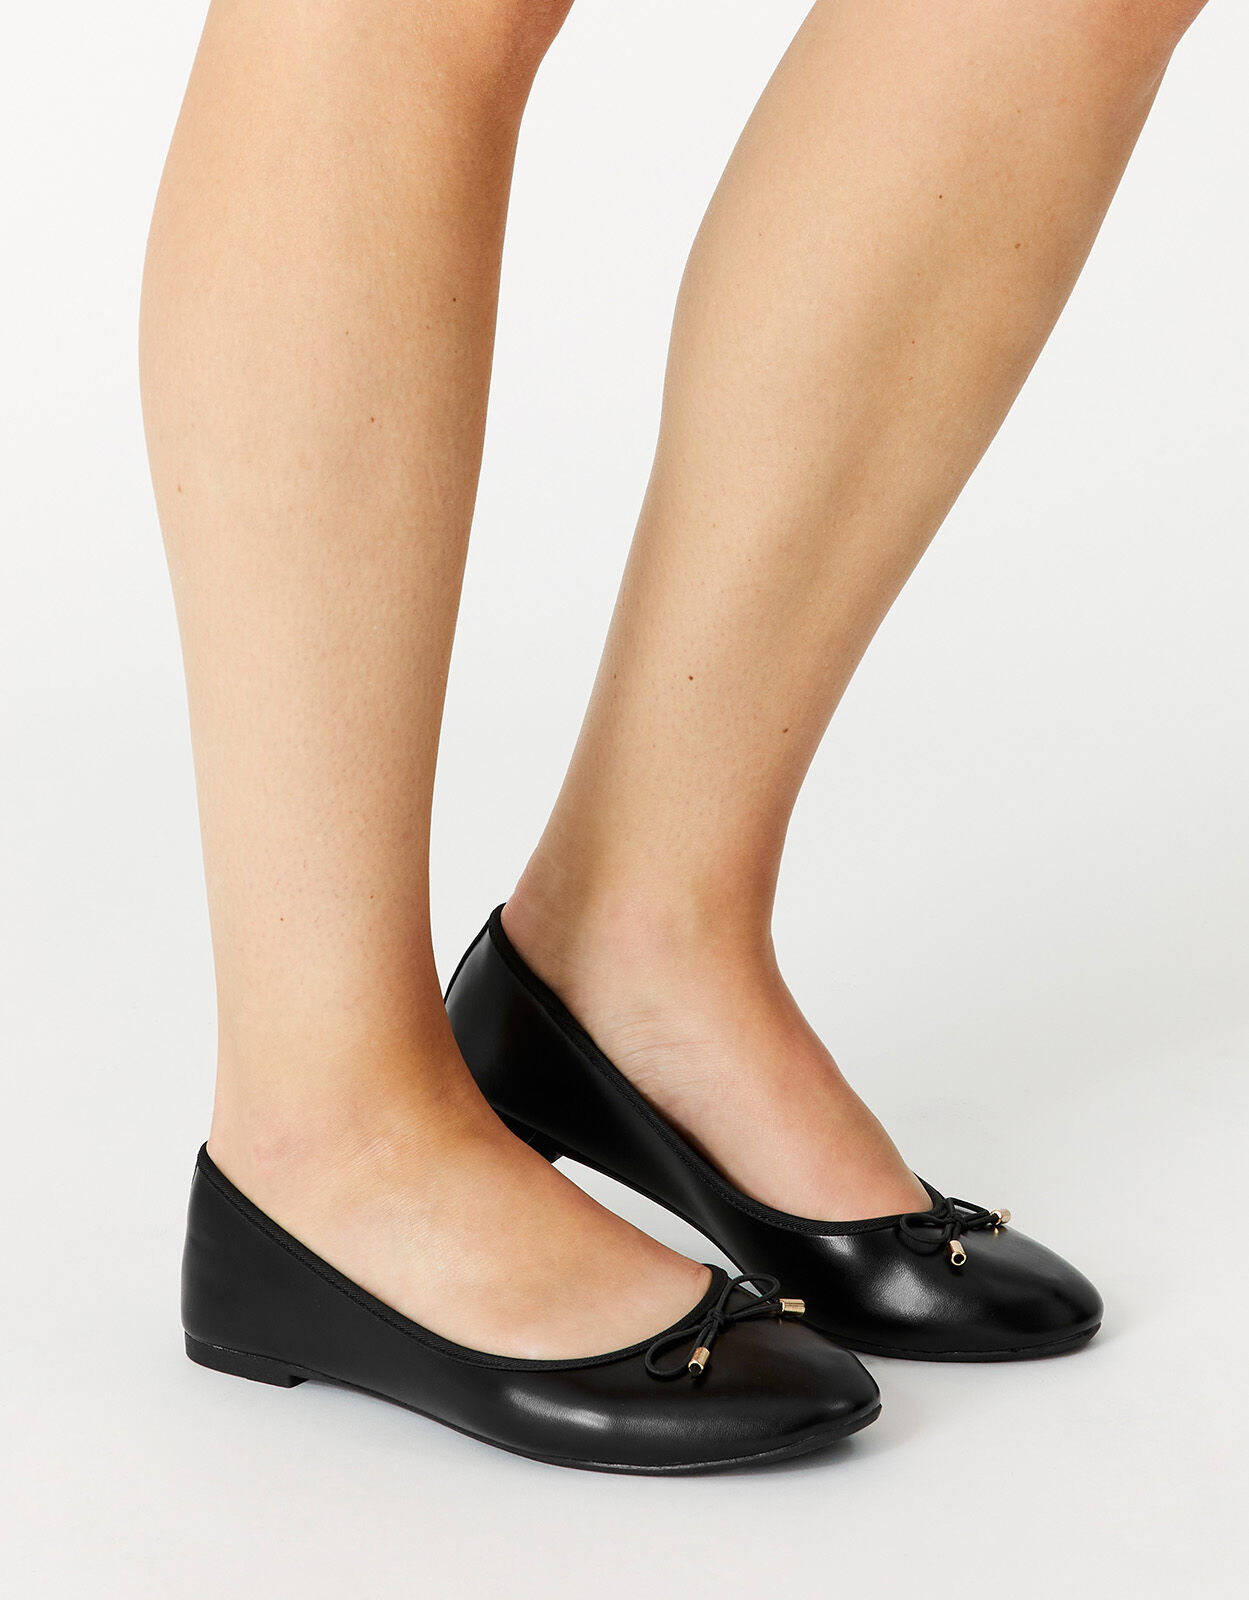 Adult Ballerine  Leather Ballet Flats by Softstar Shoes